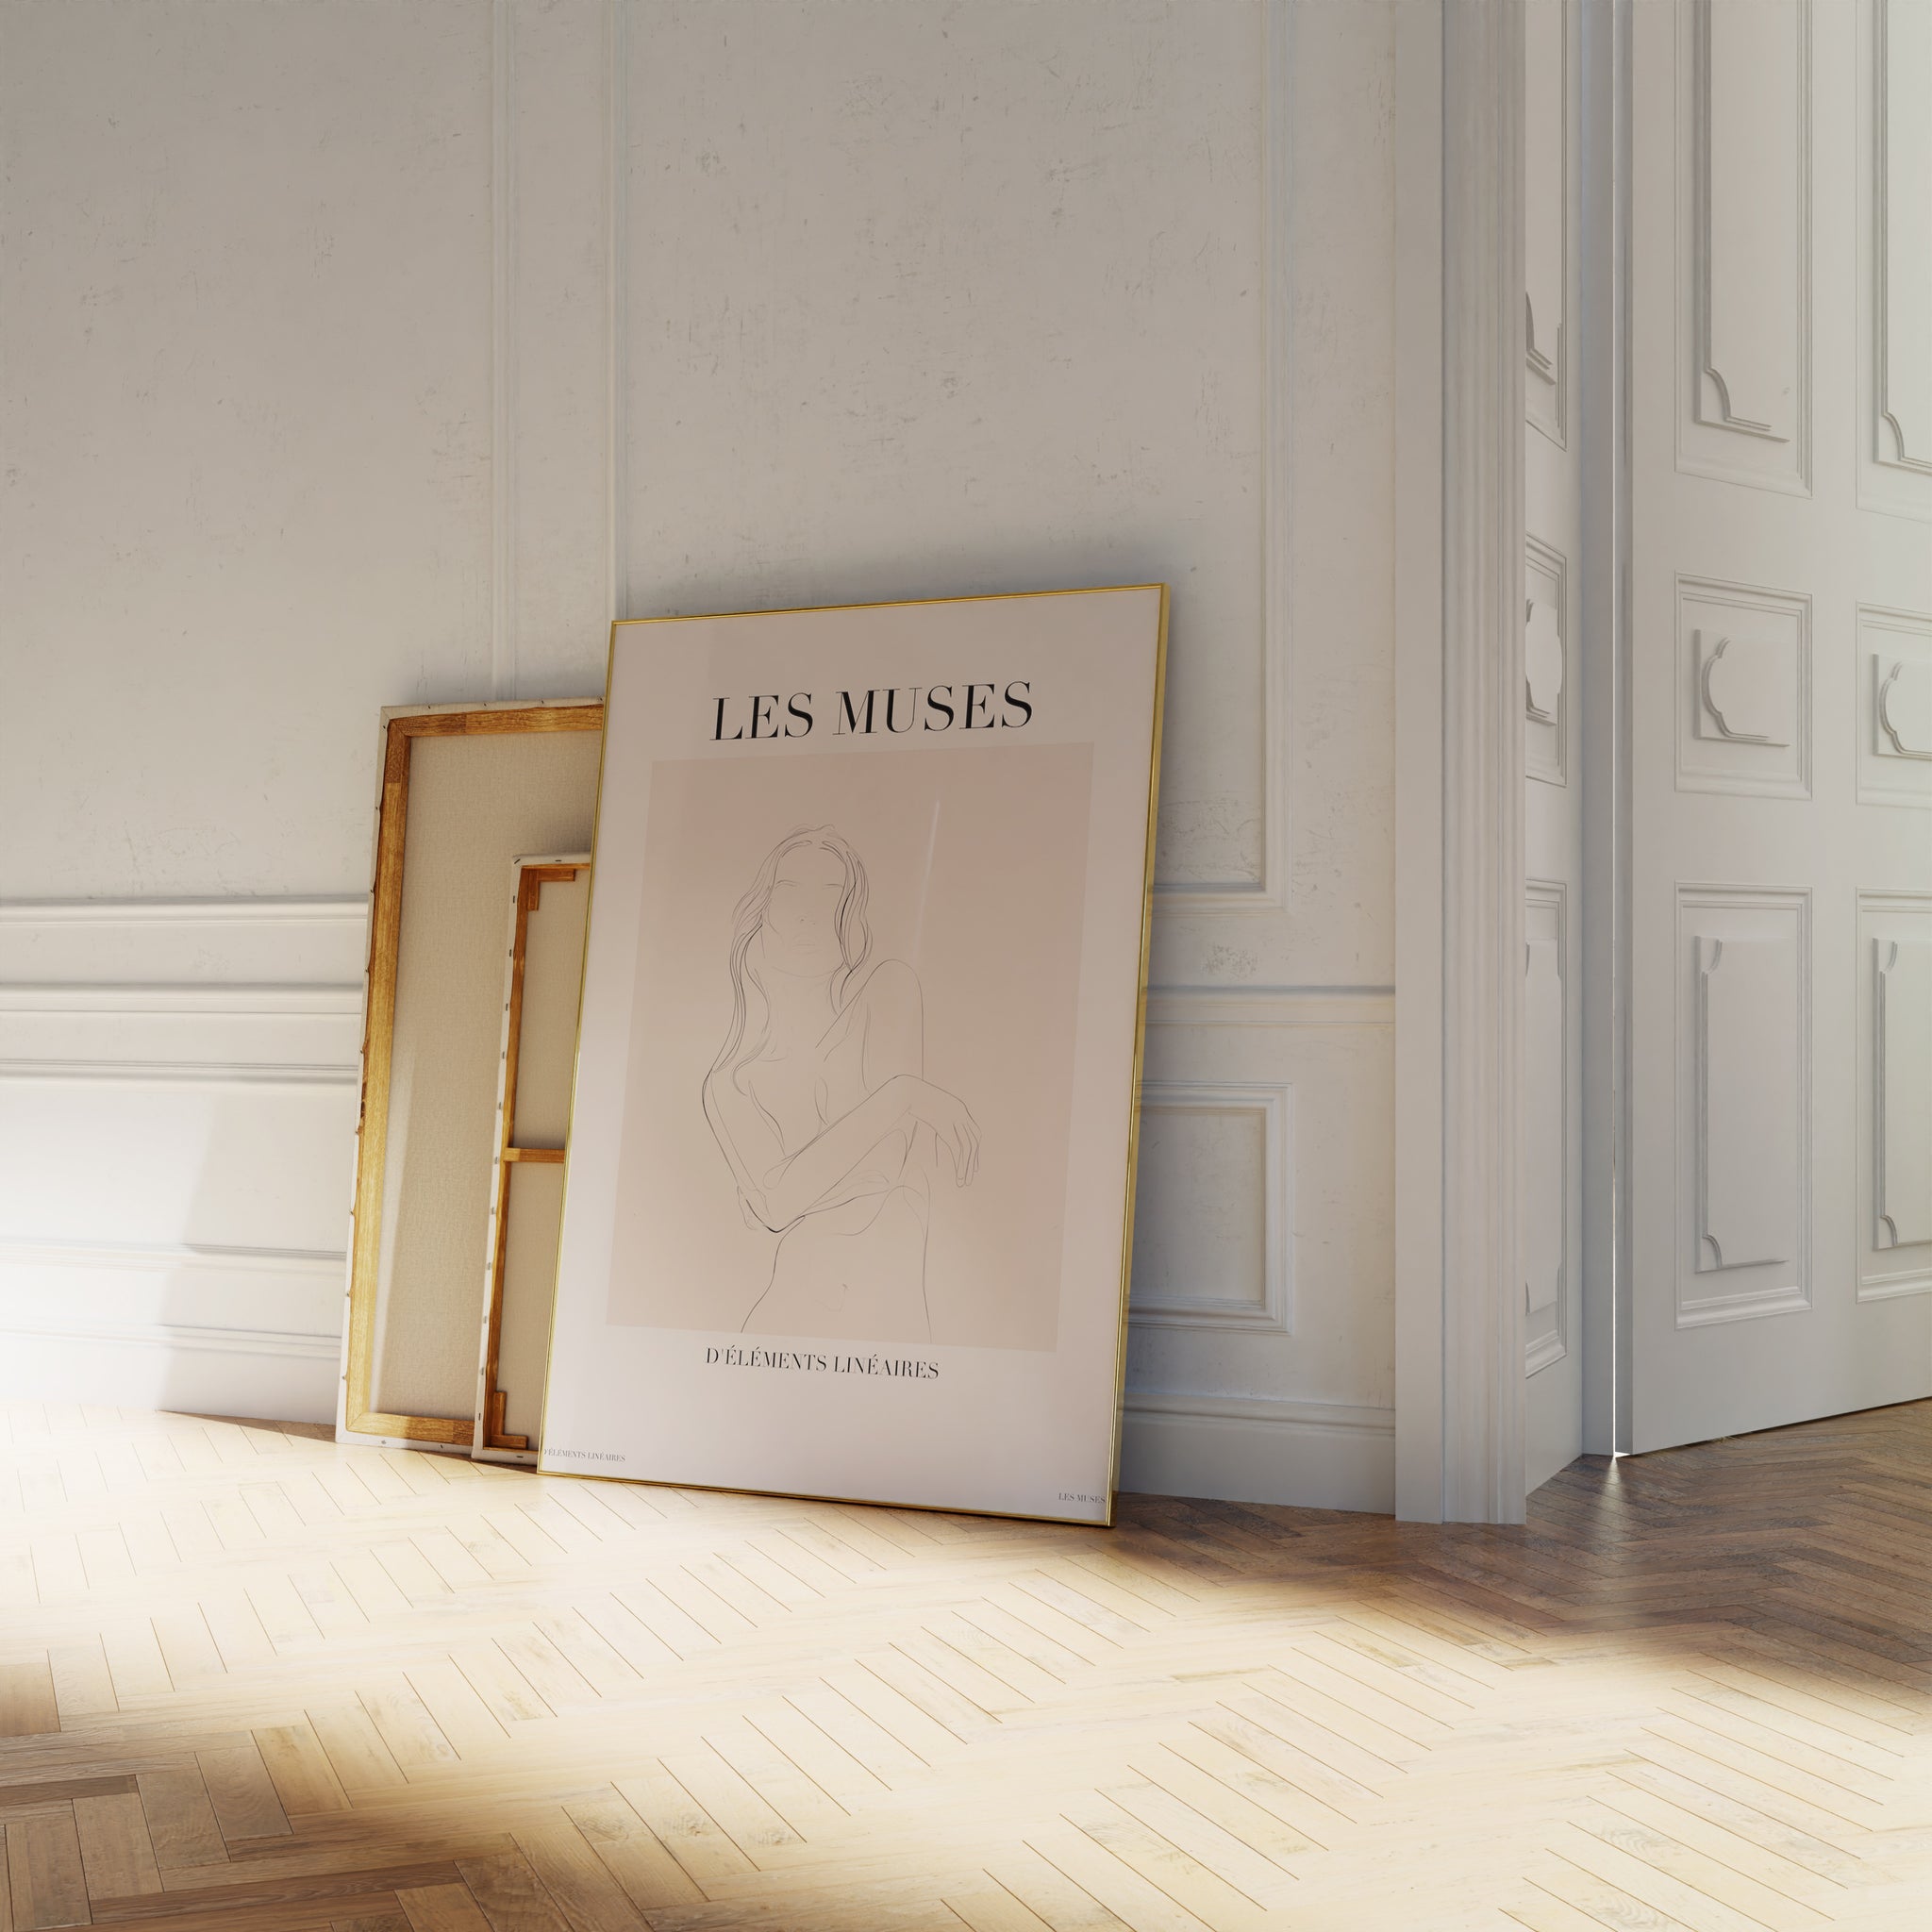 Les Muses is a dreamy wall art collection of line art drawings and paintings.
Select among illustrations of greek goddesses, seashells, cherubs and muses. 